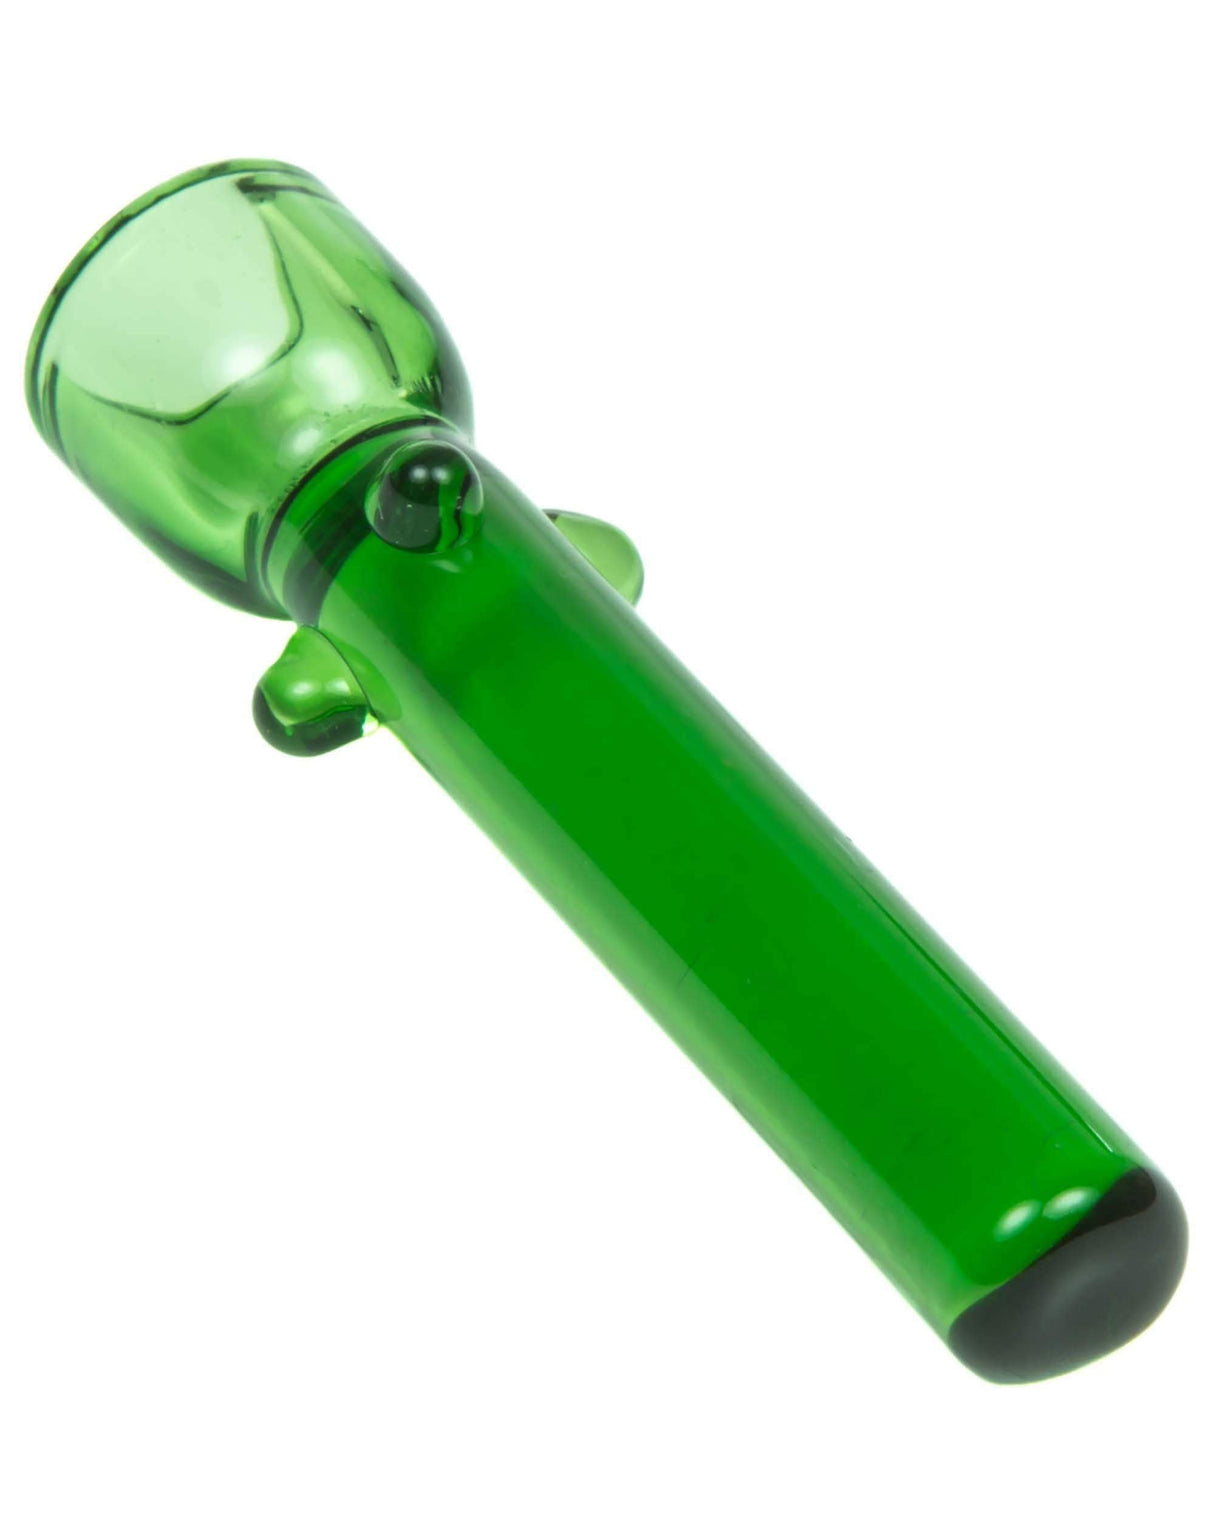 Valiant Distribution Rainbow Glass Dab Nail in green, 90-degree joint, for dab rigs, side view on white background